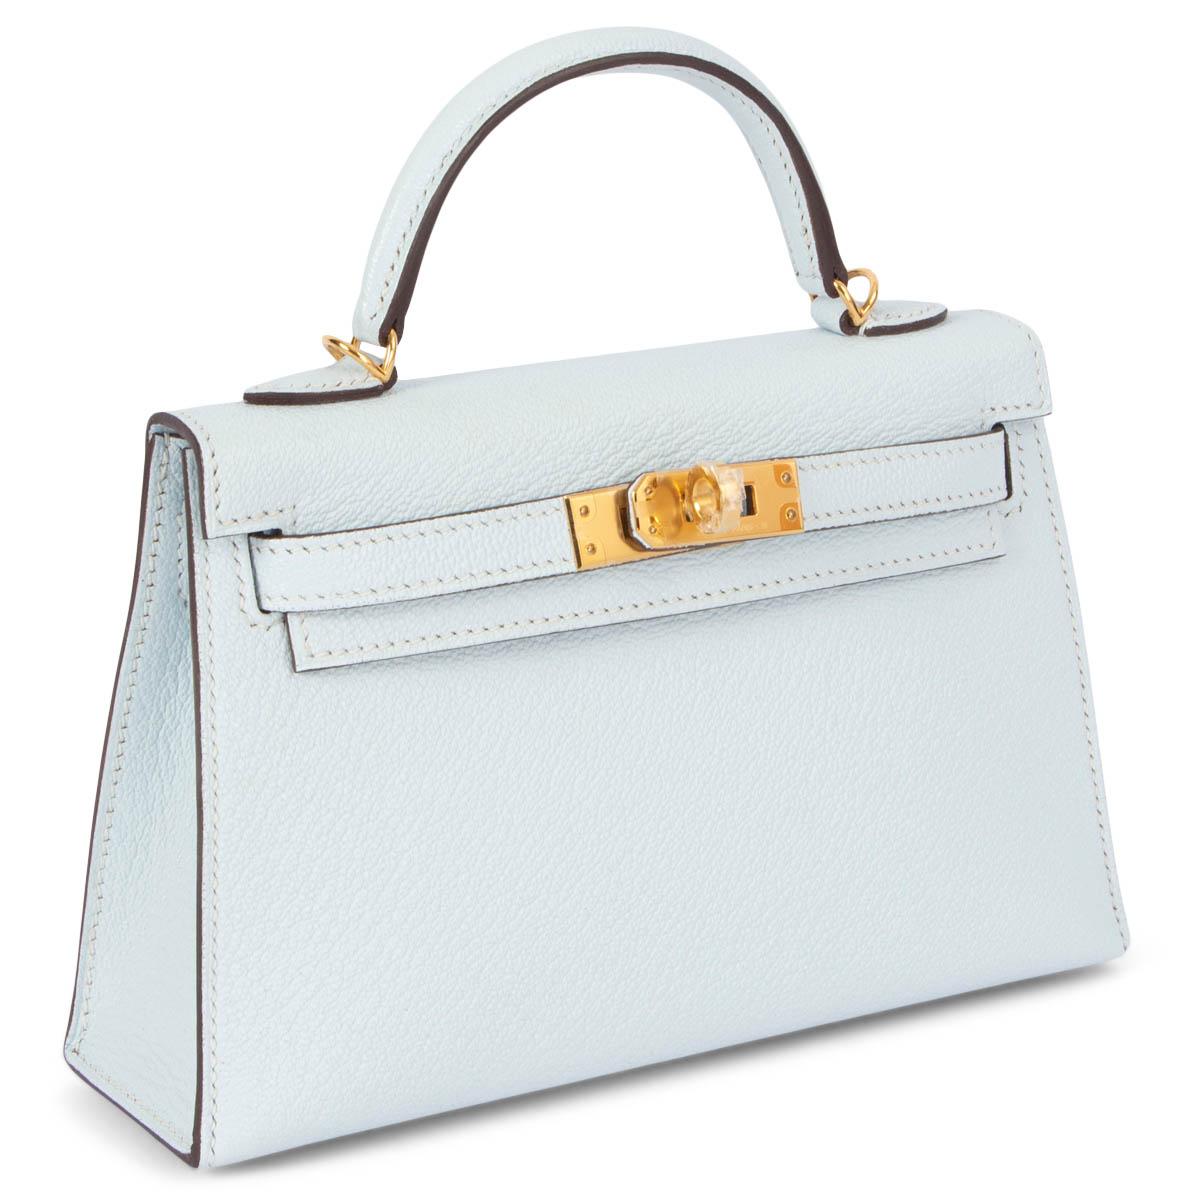 100% authentic Hermès Mini Kelly 20 Sellier bag in Bleu Brume (pale blue) Chevre Mysore leather featuring gold-plated hardware. Lined in Chèvre (goat skin) with an open pocket against the back. Has been carried and the back shows some minor